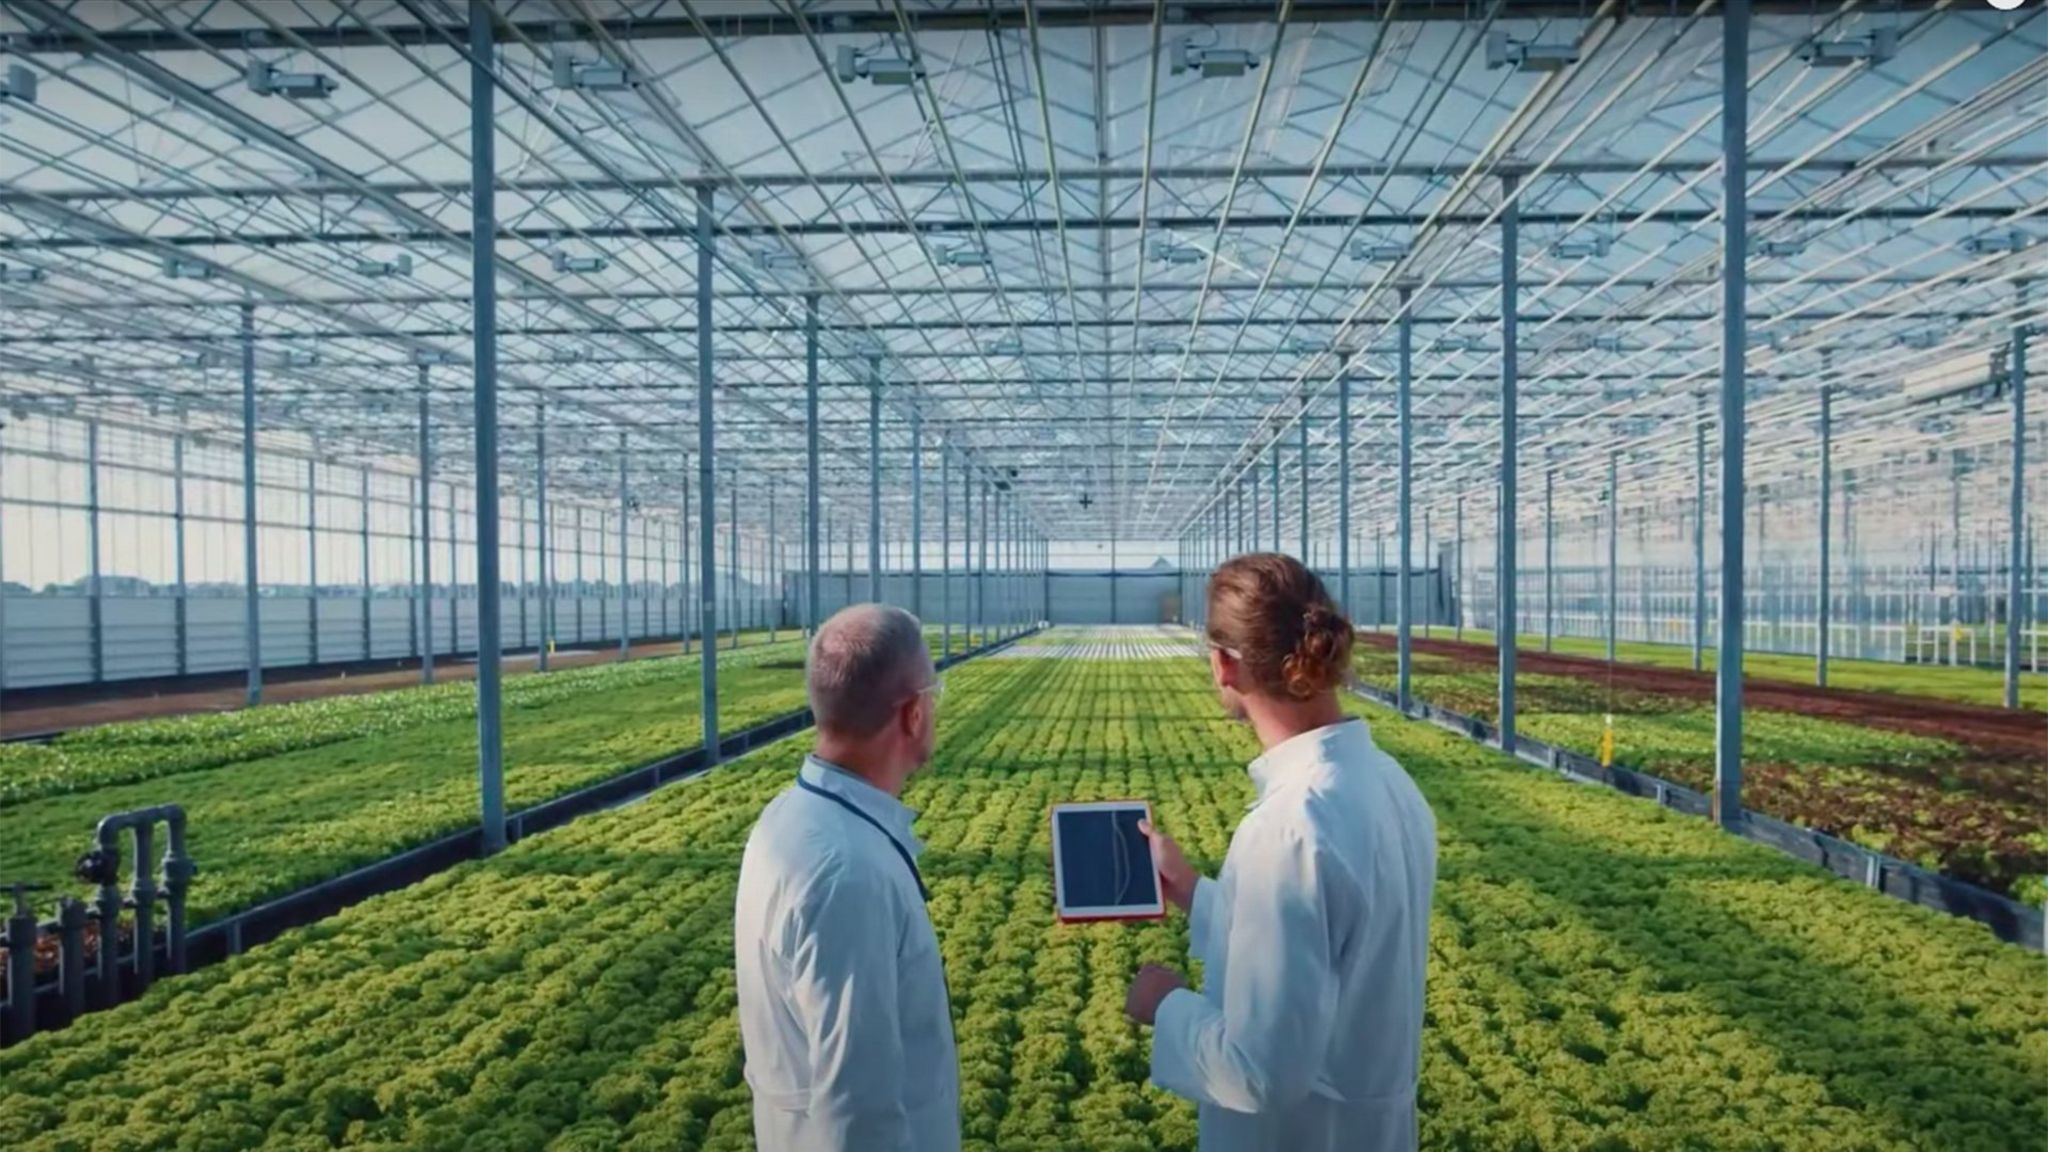 Publicity material shows a greenhouse providing food for Neom